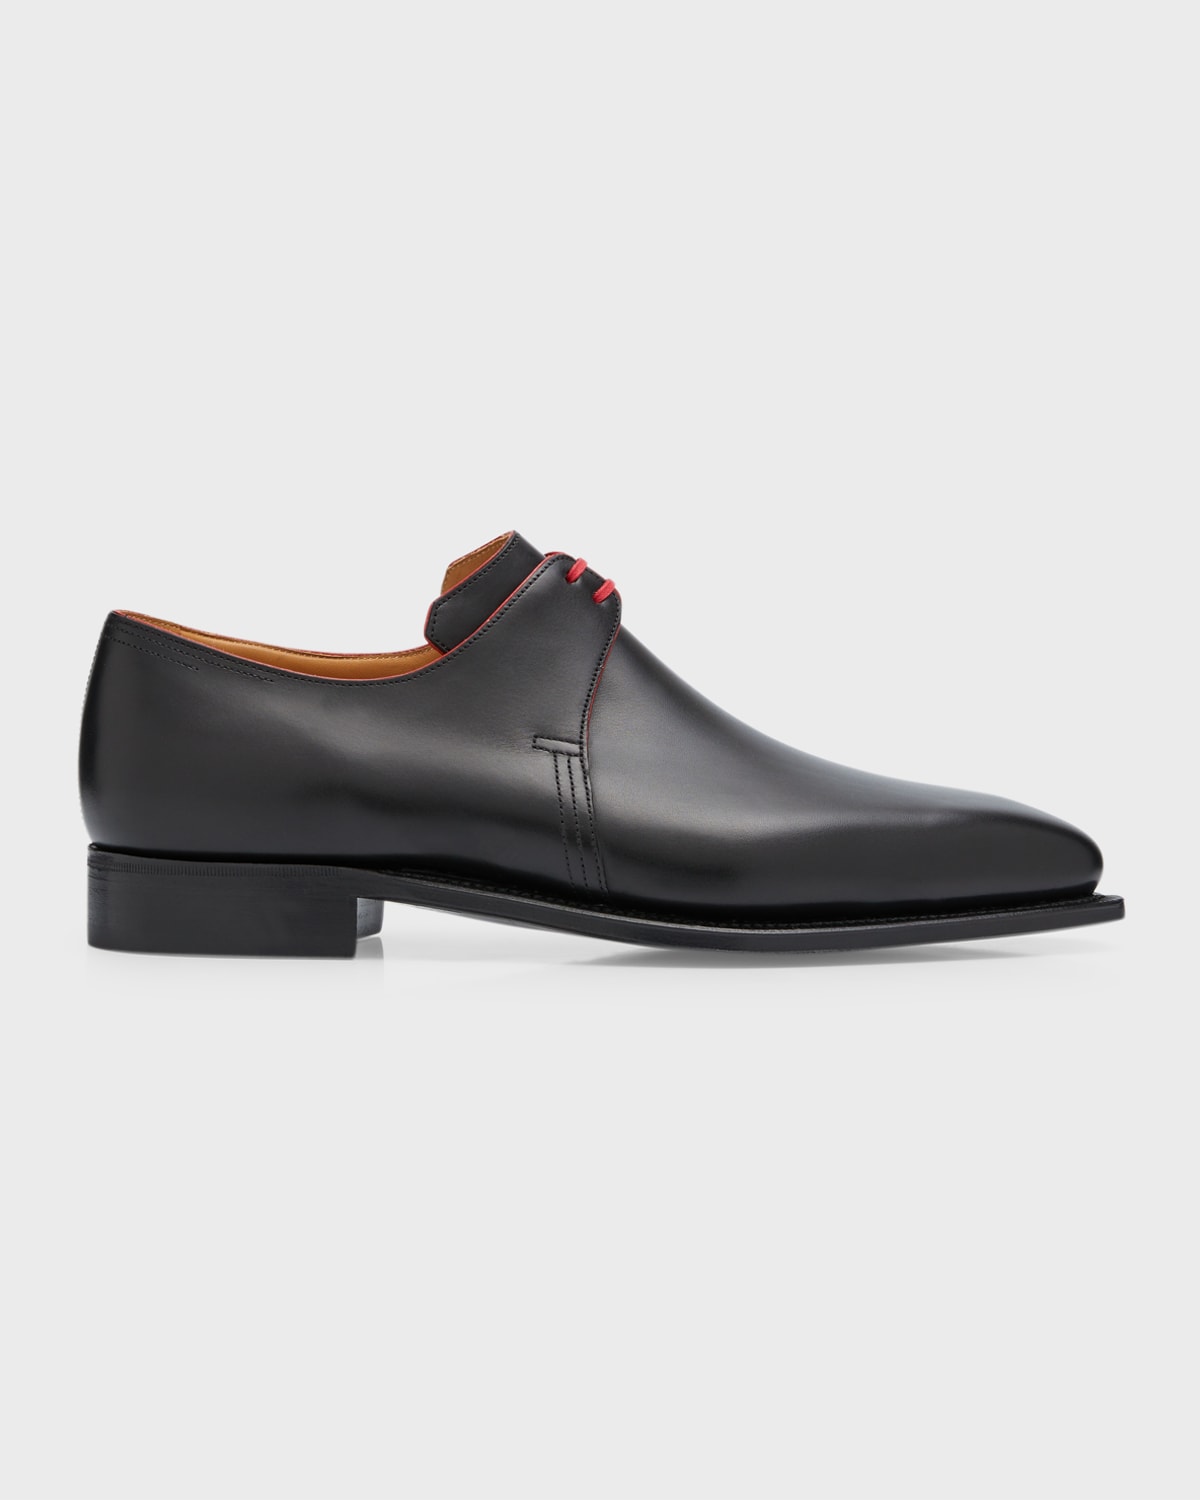 Corthay Arca Calf Leather Derby Shoe with Red Piping, Black